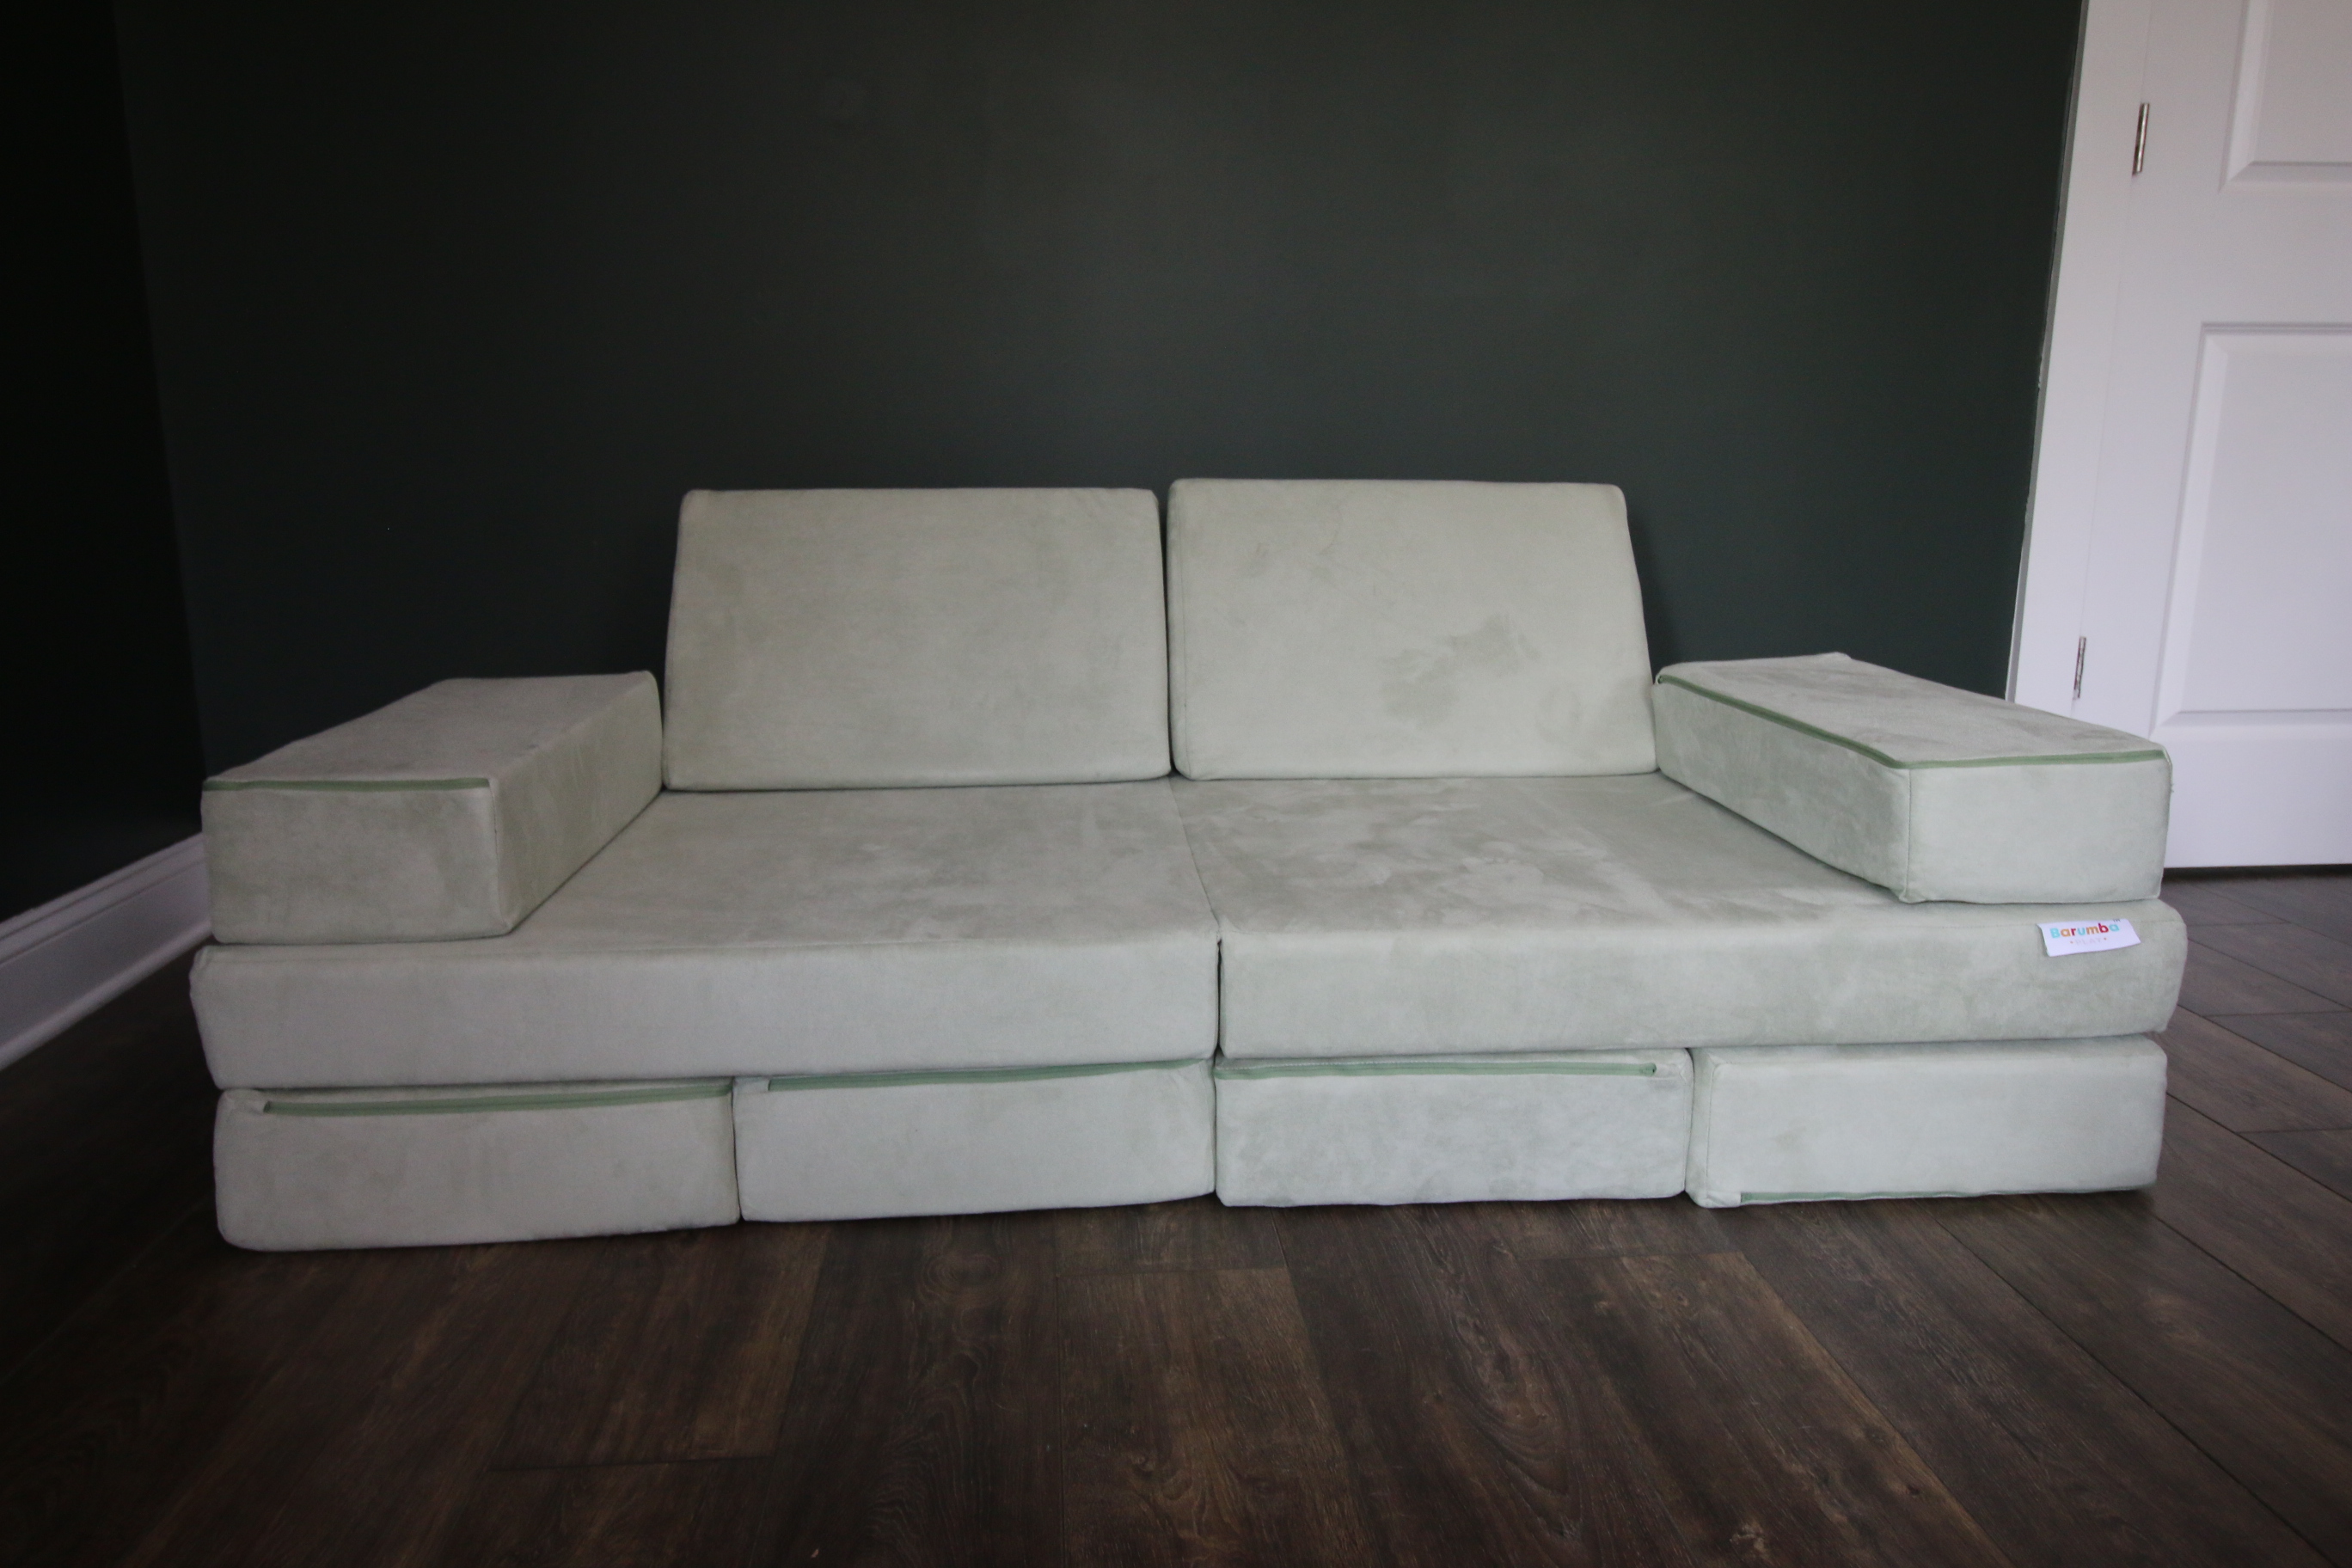 barumba play couch set up like a couch